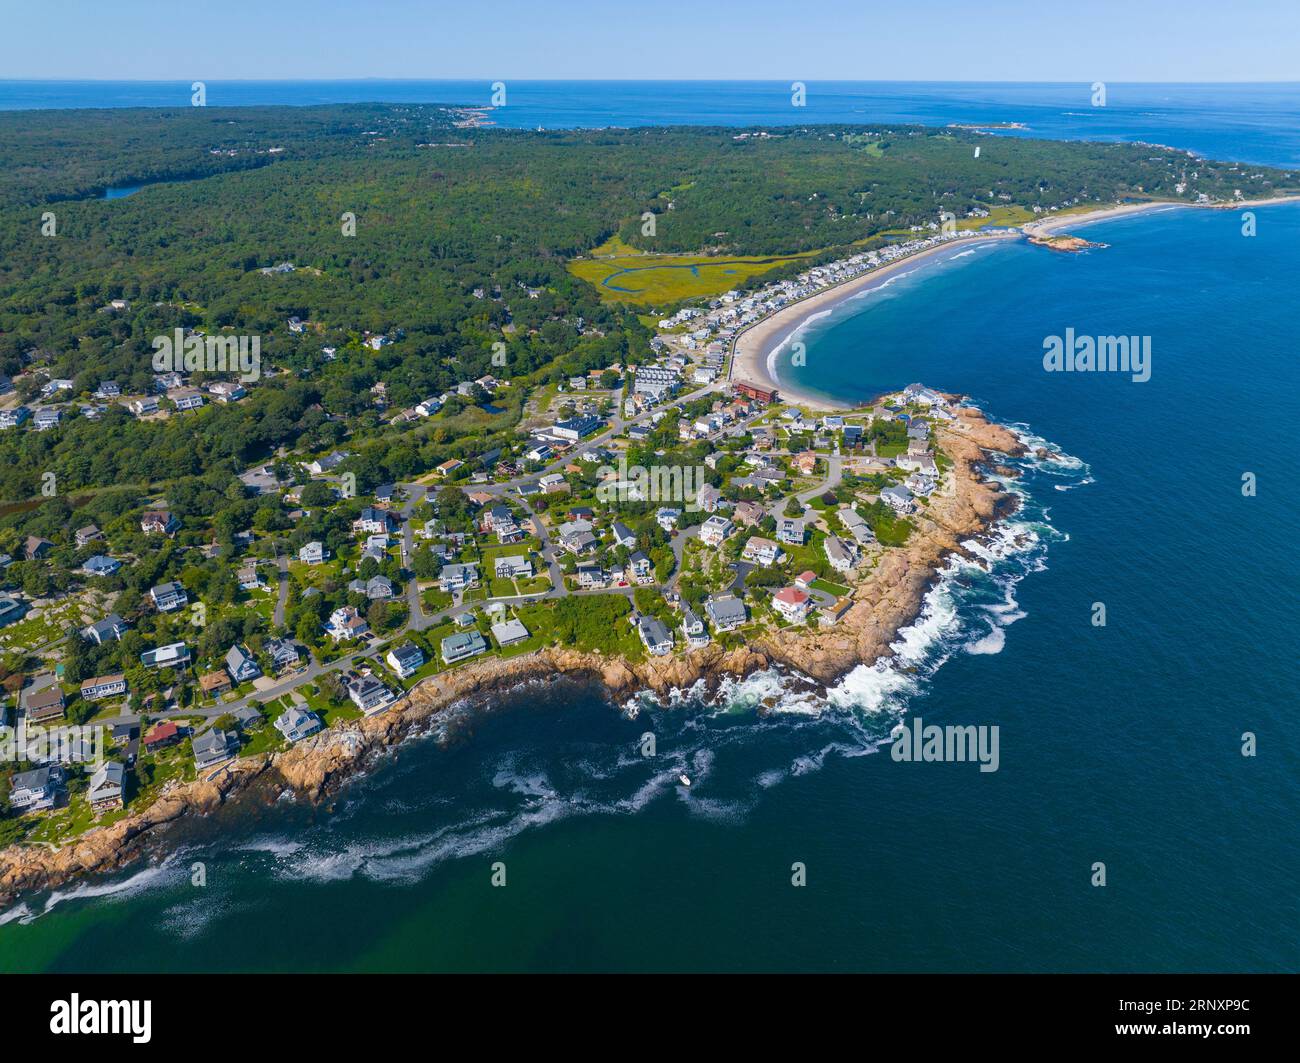 Aerial view of historic waterfront buildings next to Good Harbor Beach in Gloucester, Cape Ann, Massachusetts MA, USA. Stock Photo